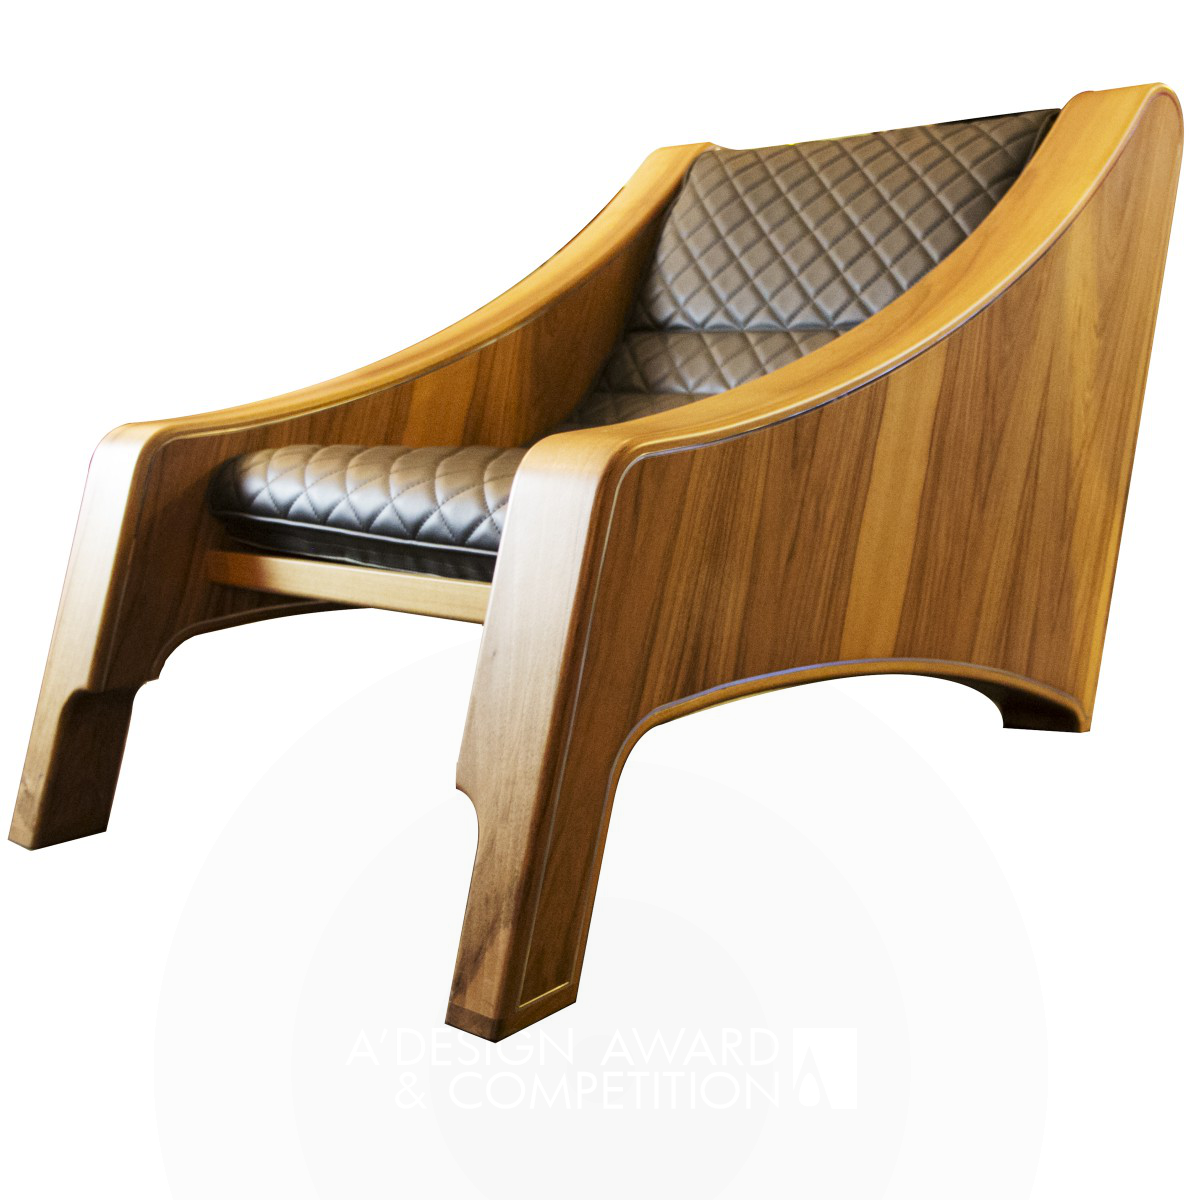 TriLounge Chair by Lionel Scharly